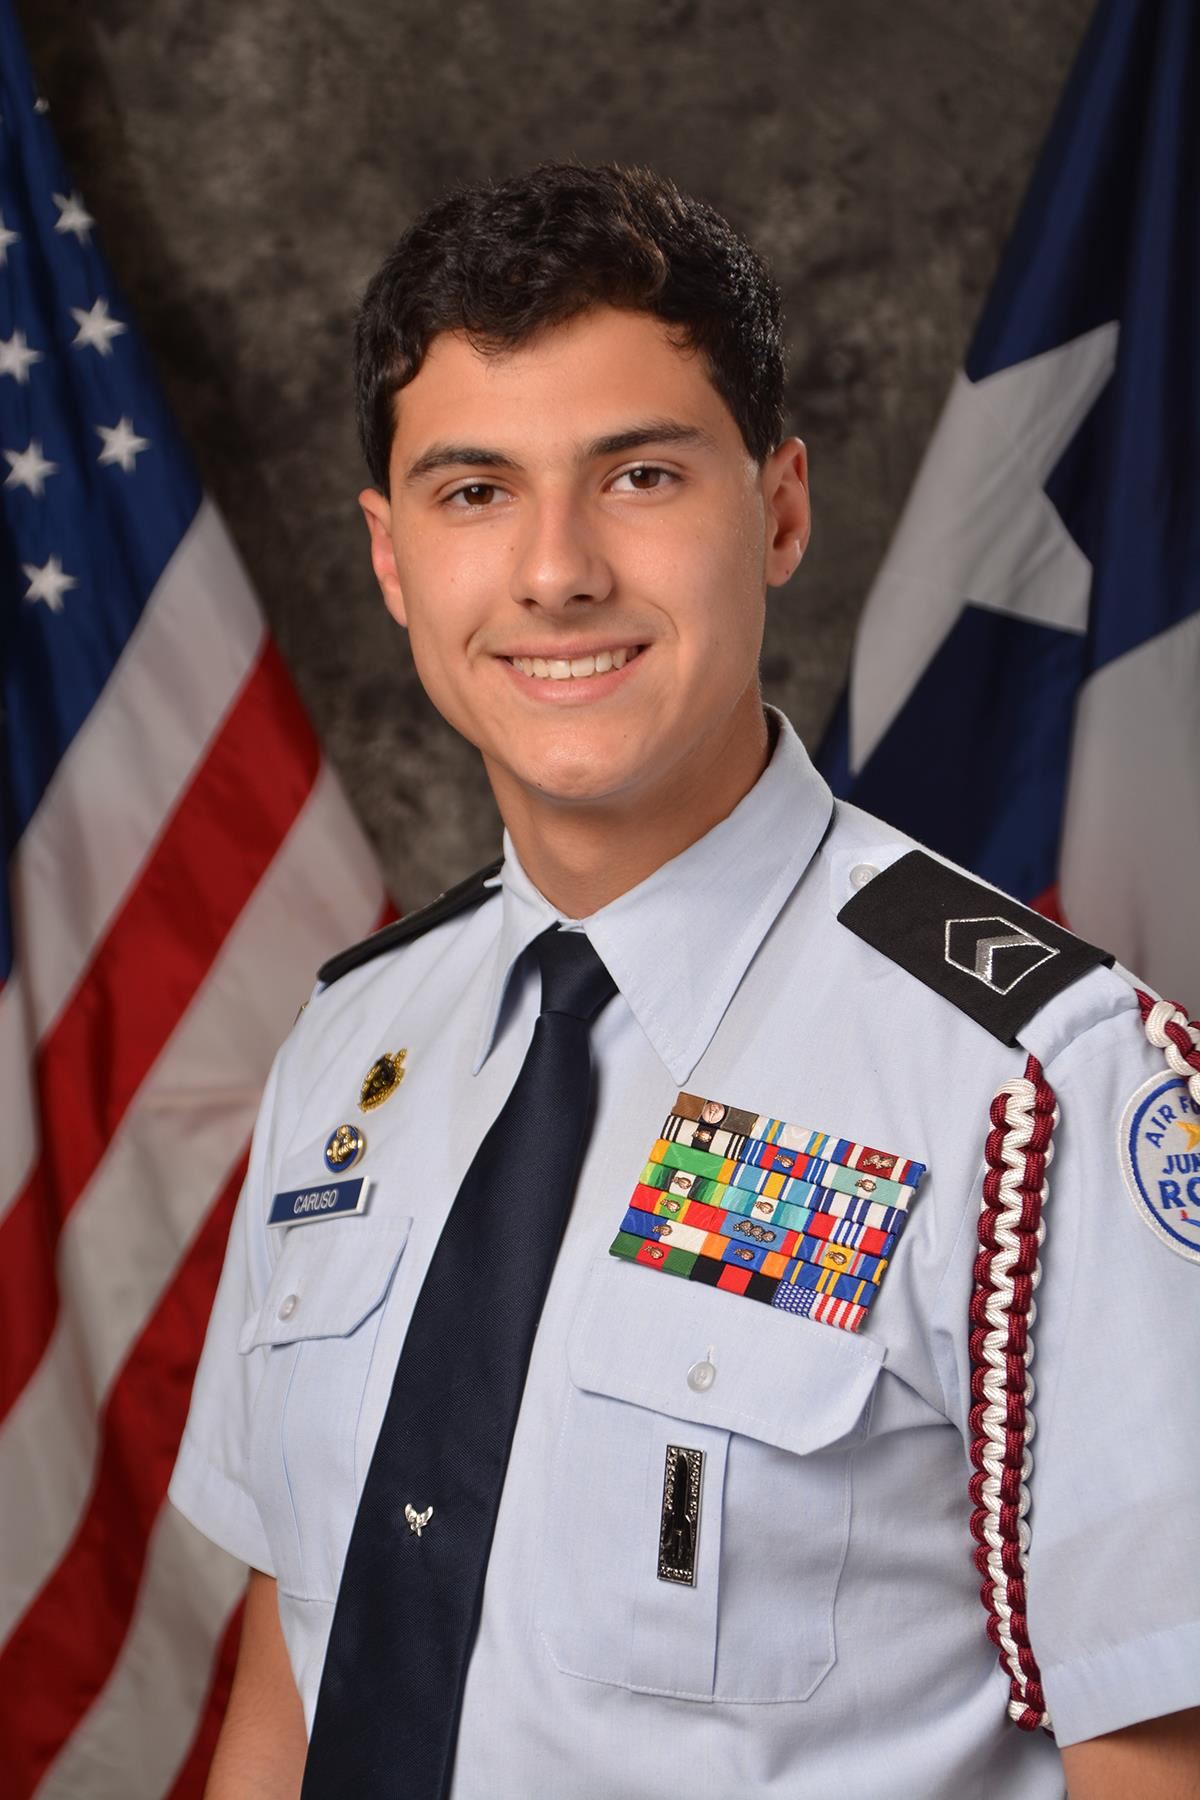 Bridgeland High School junior Tomas Caruso receive a scholarship to take part in the 2022 Air Force Flight Academy Program.